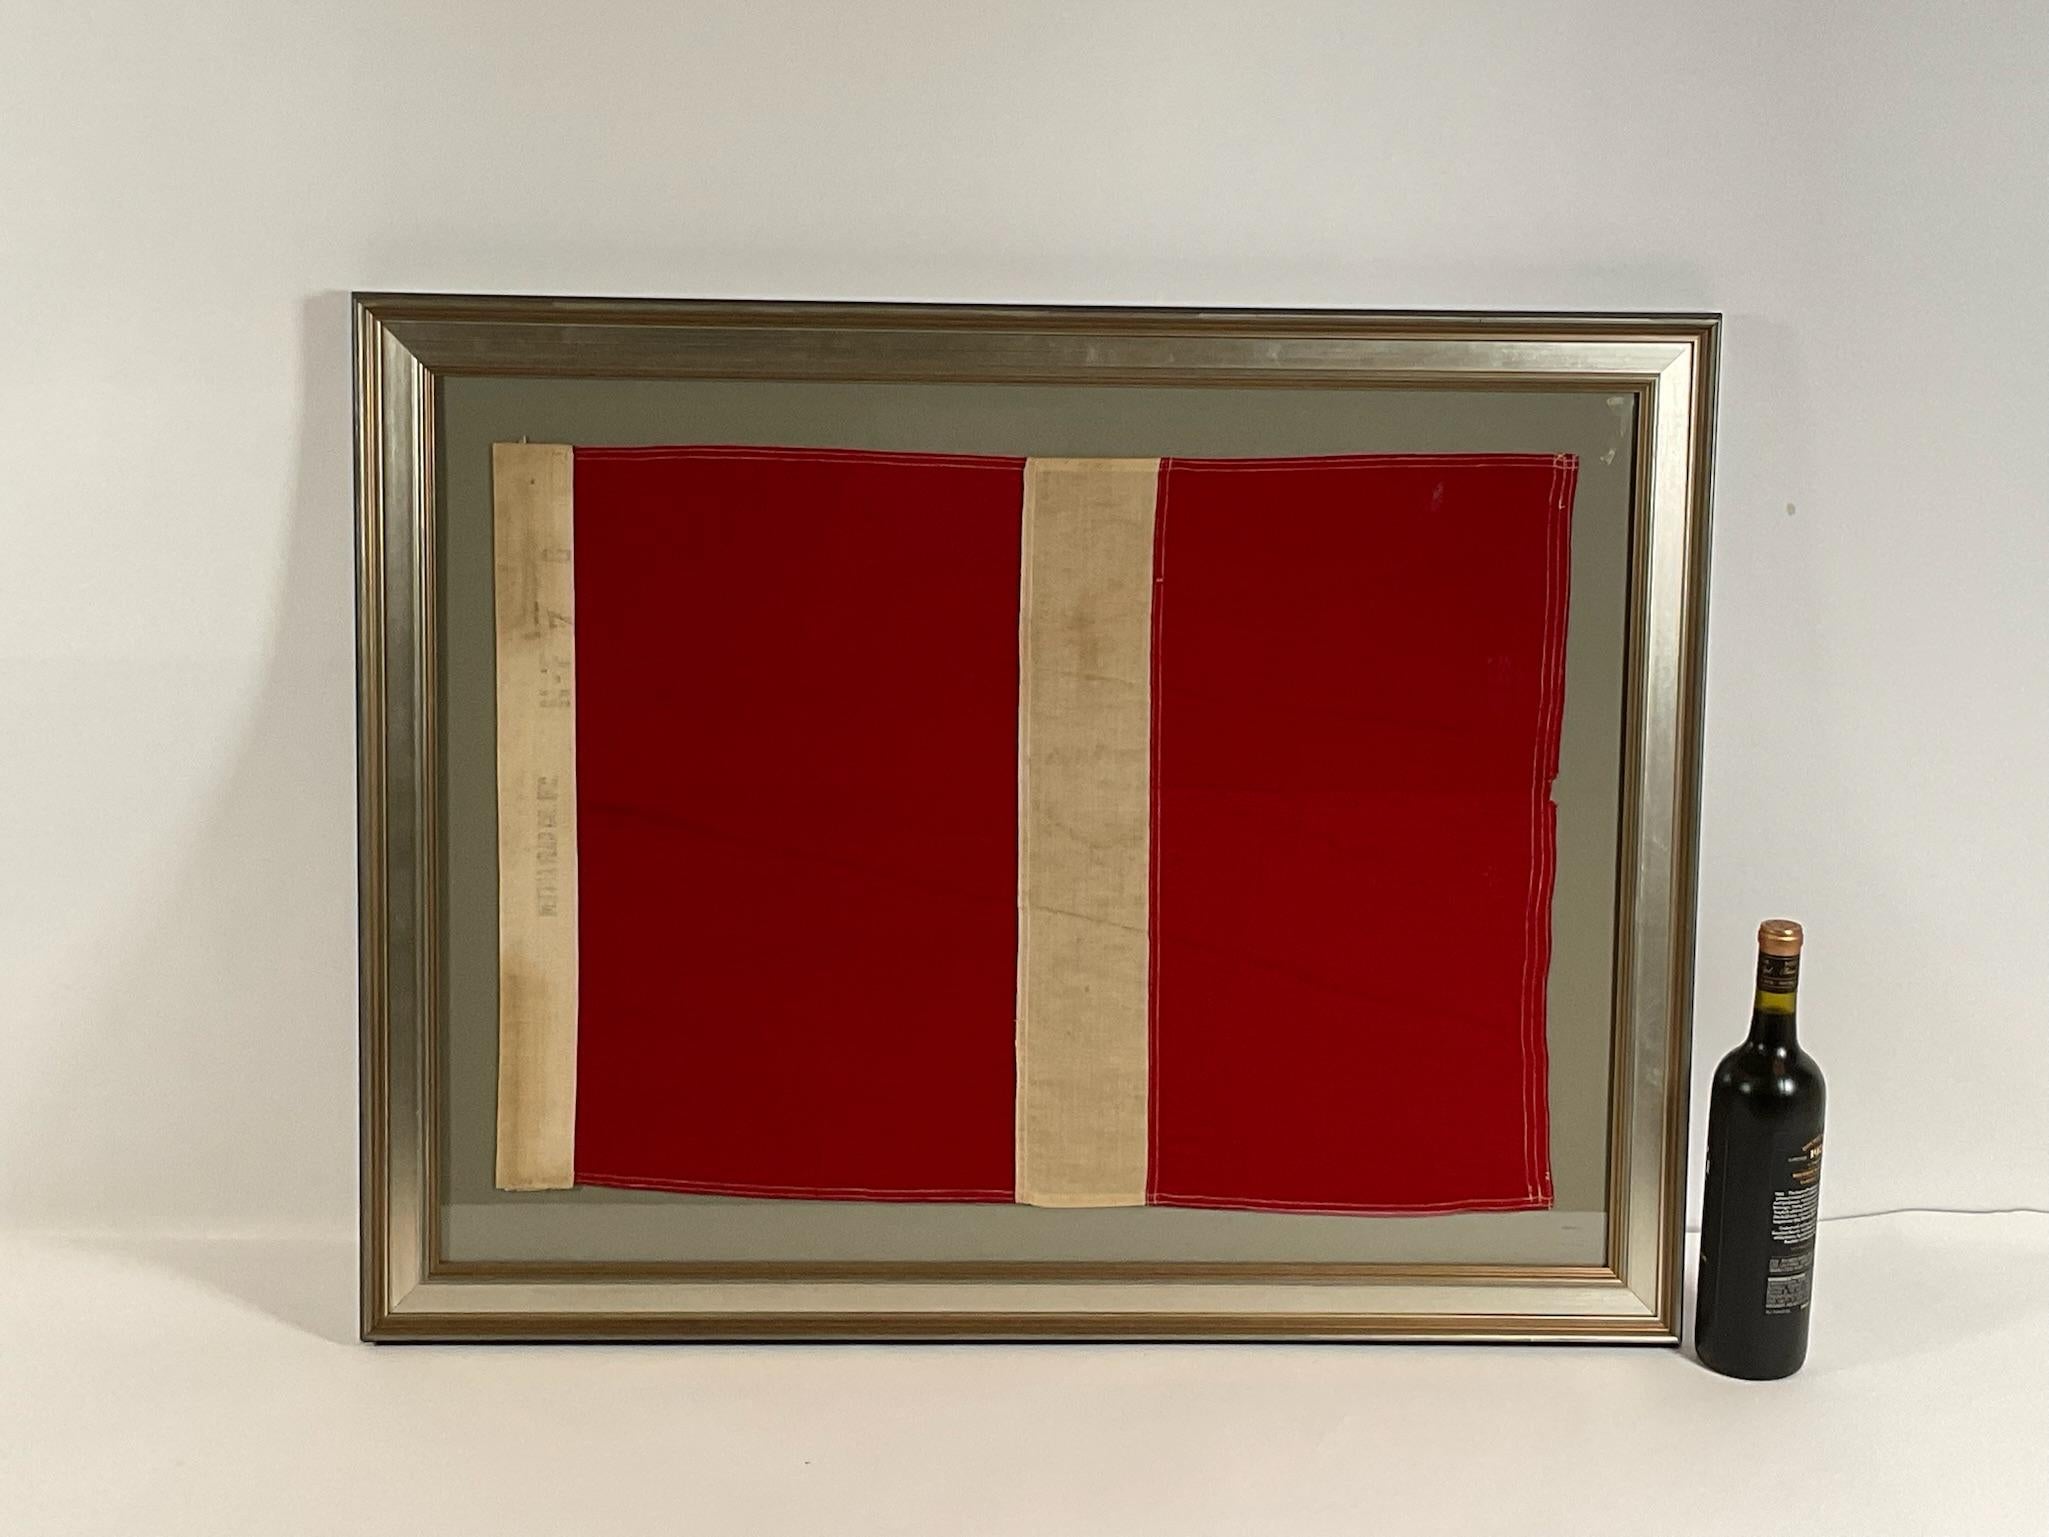 Linen maritime flag with sturdy canvas hoist and stitched panels of red and white. The hoist is stamped Dettra Flag Company Incorporated. This is a US Navy signal for number SEVEN, signal code 